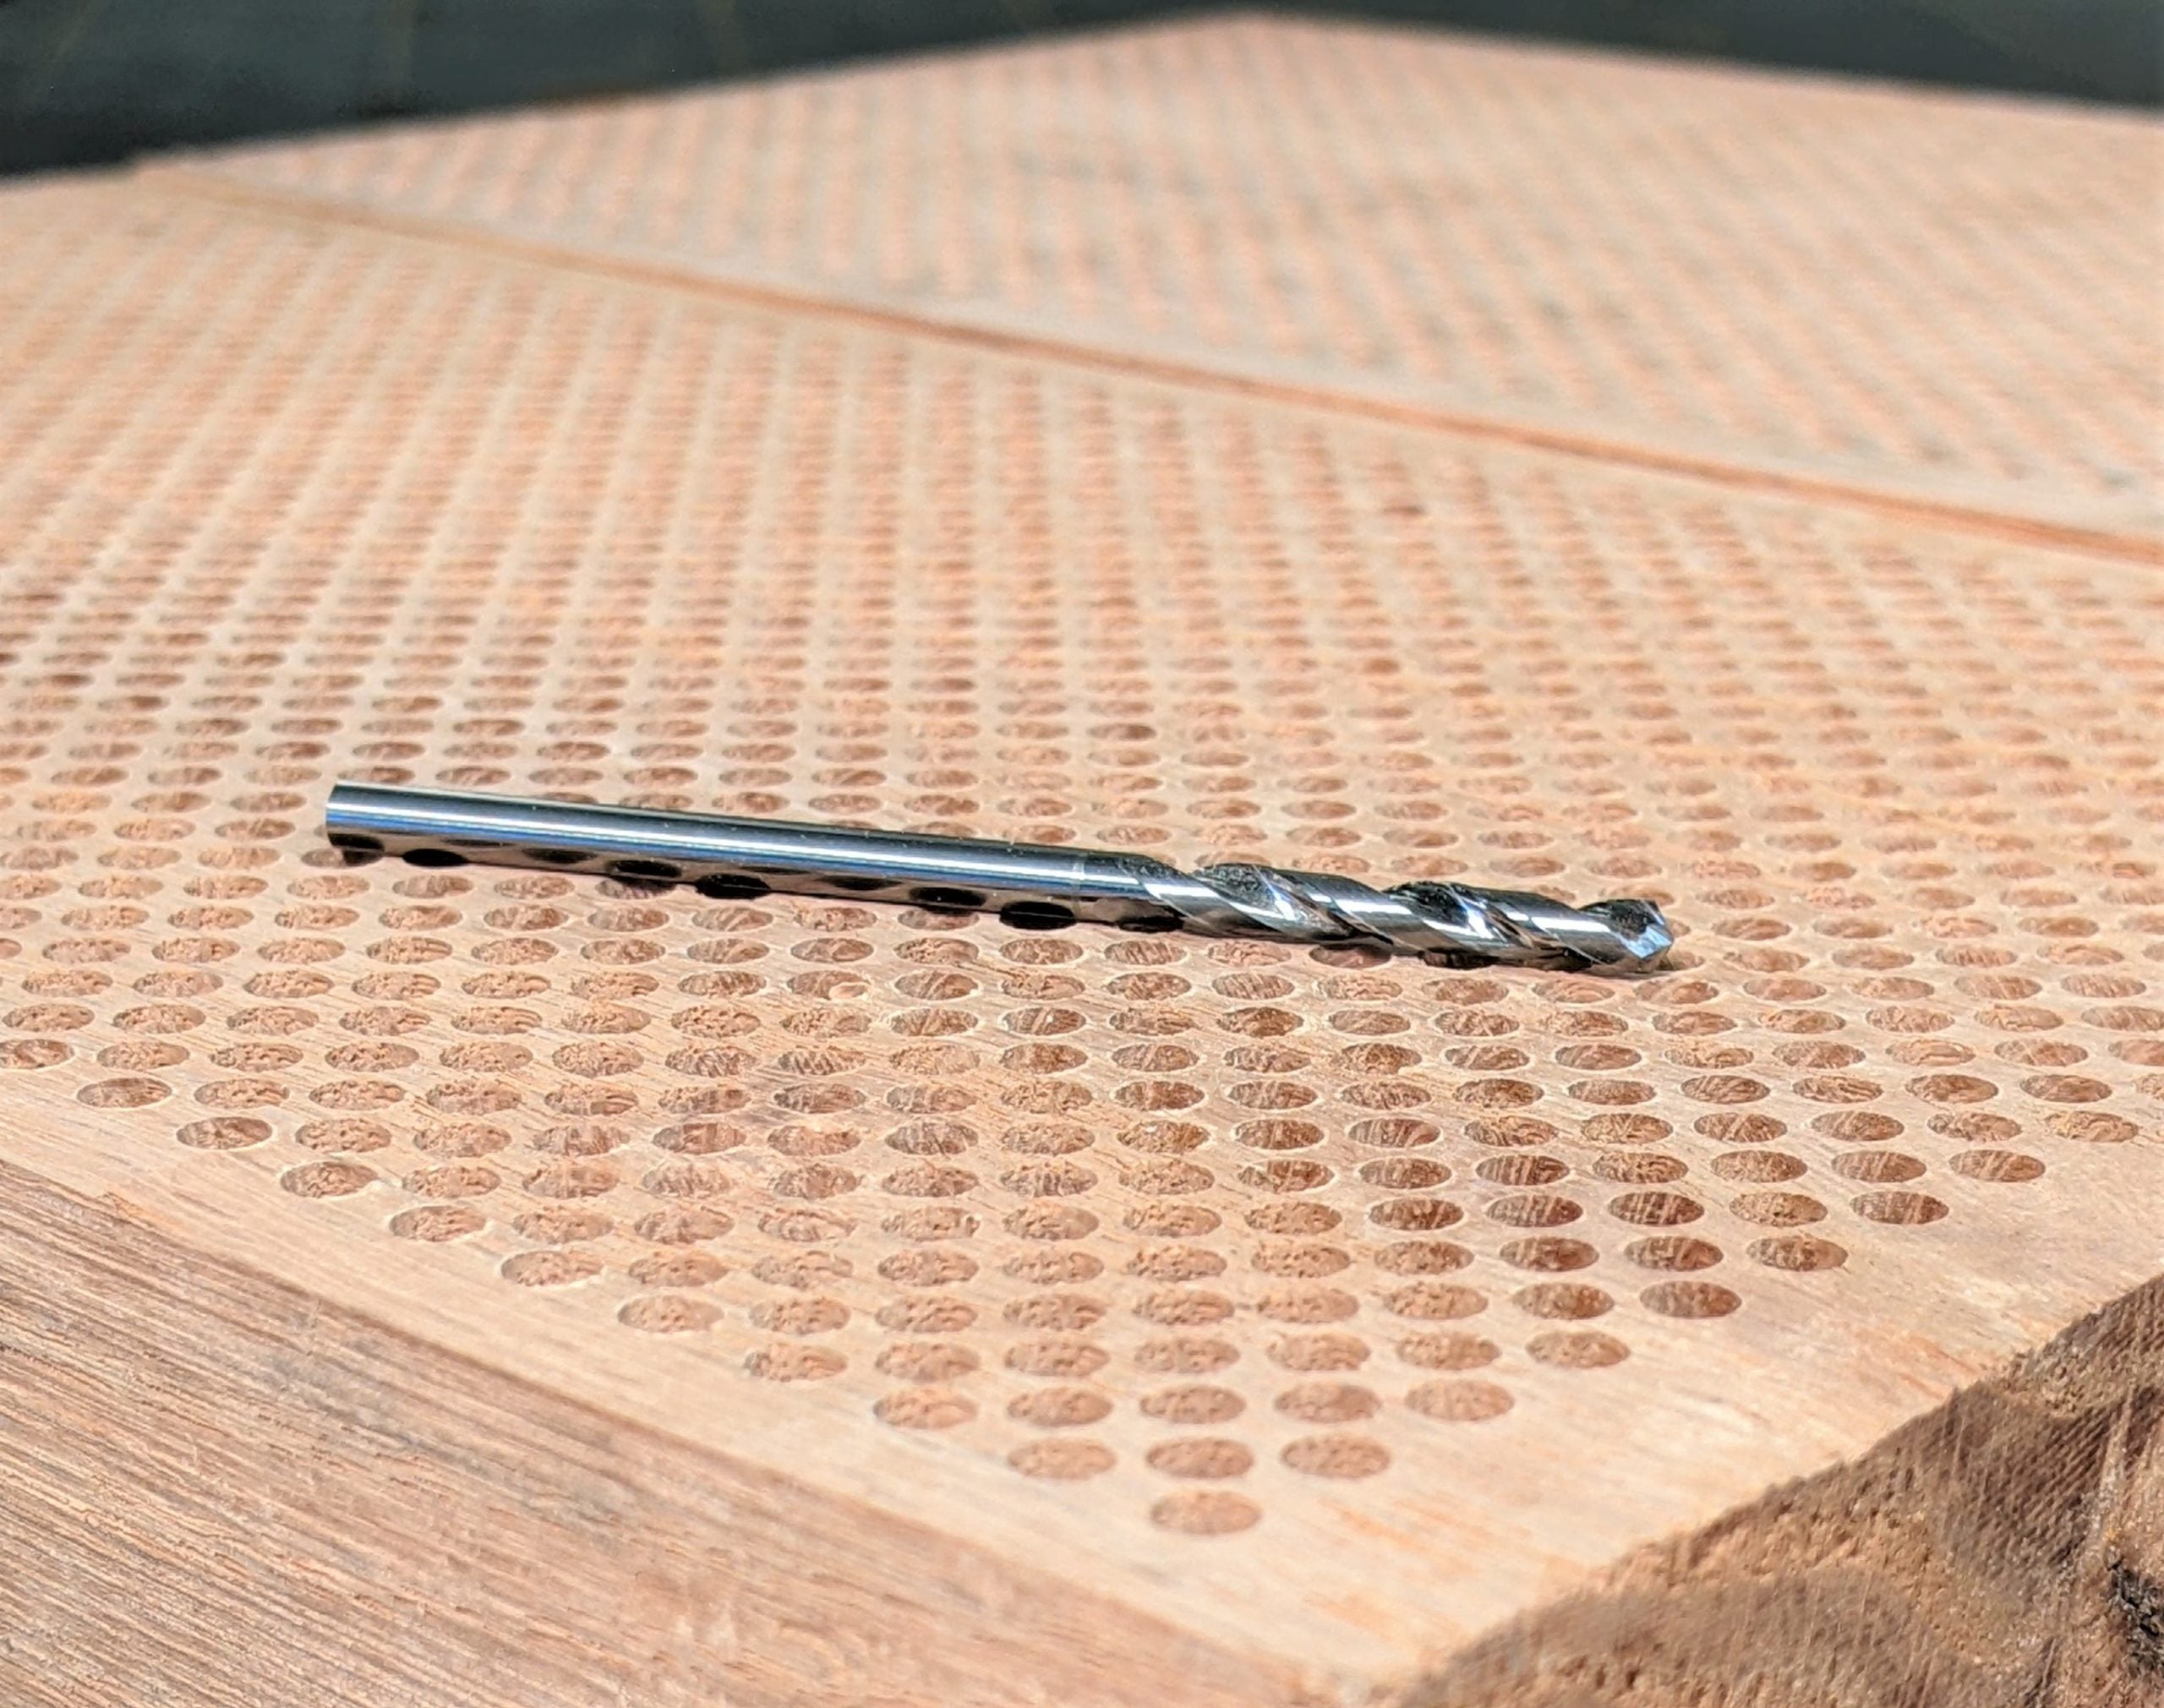 1/8" Carbide drill bit for cnc router projects like cribbage boards